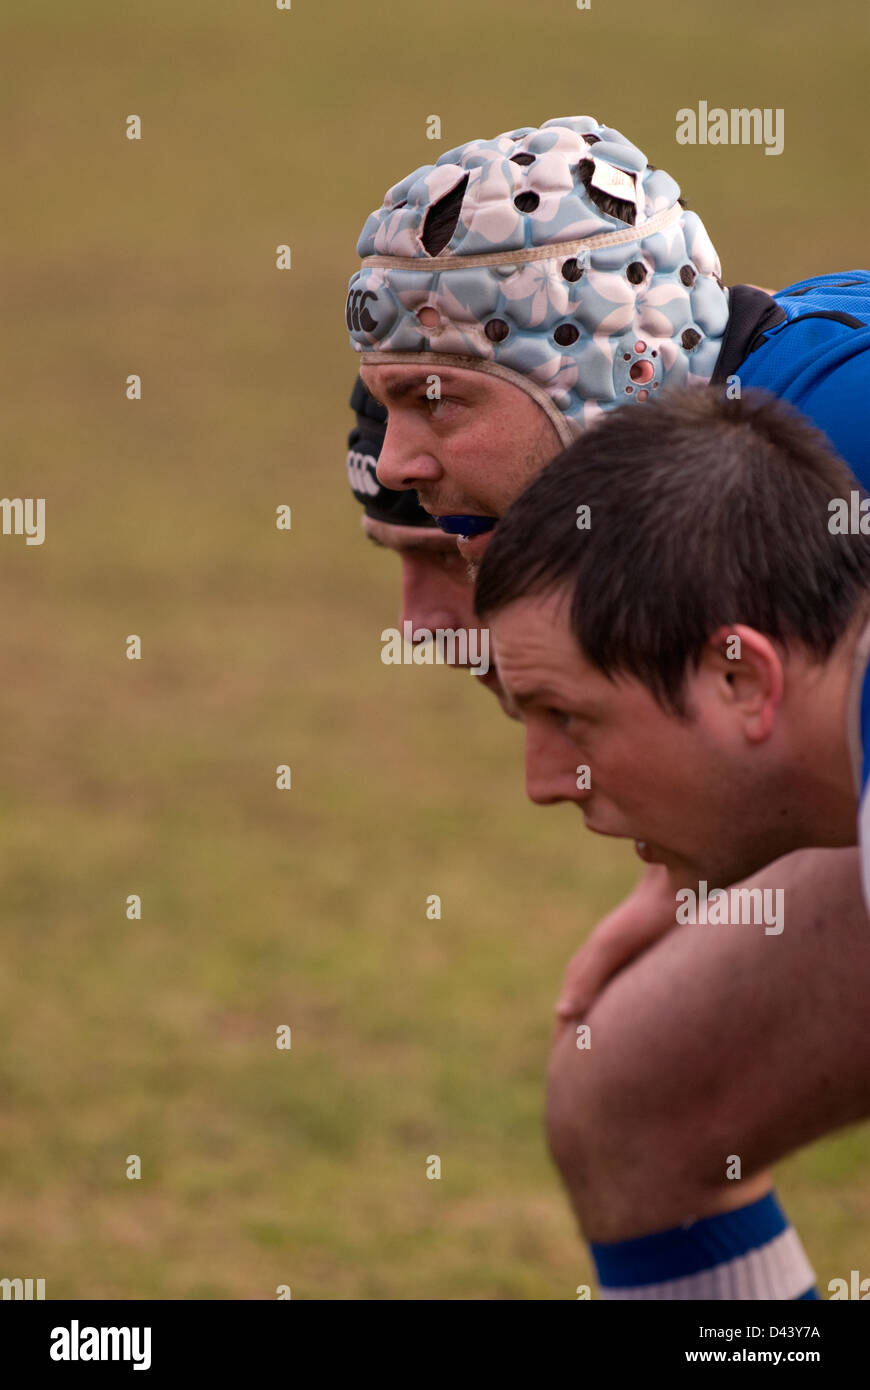 Haslemere rugby players huddle together for a scrum in their match against Merton, Haslemere, Surrey, UK. Stock Photo